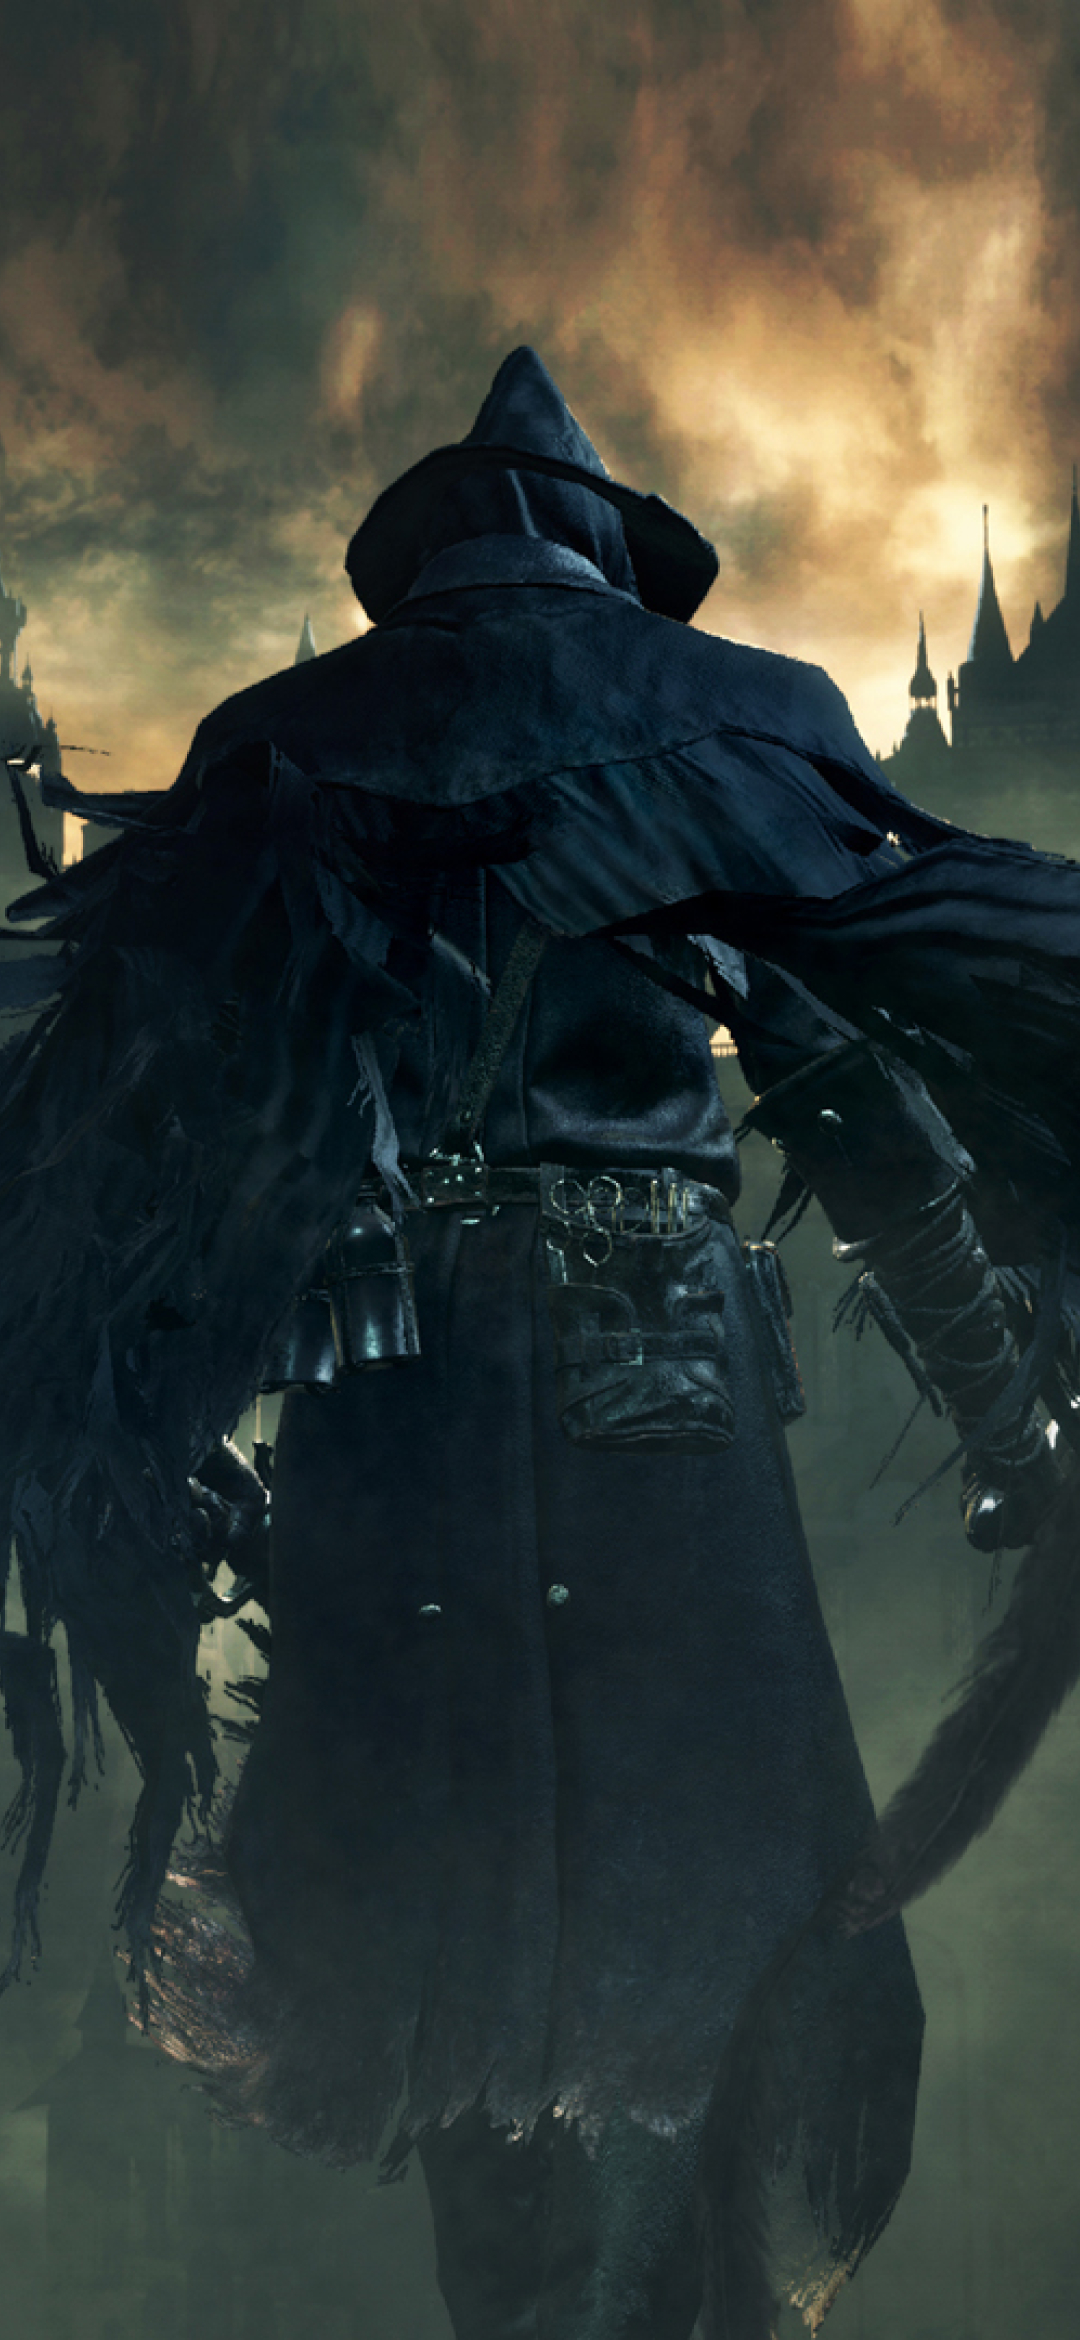 Bloodborne Hunters Wallpaper  Free Wallpapers for iPhone Android Desktop   Phone